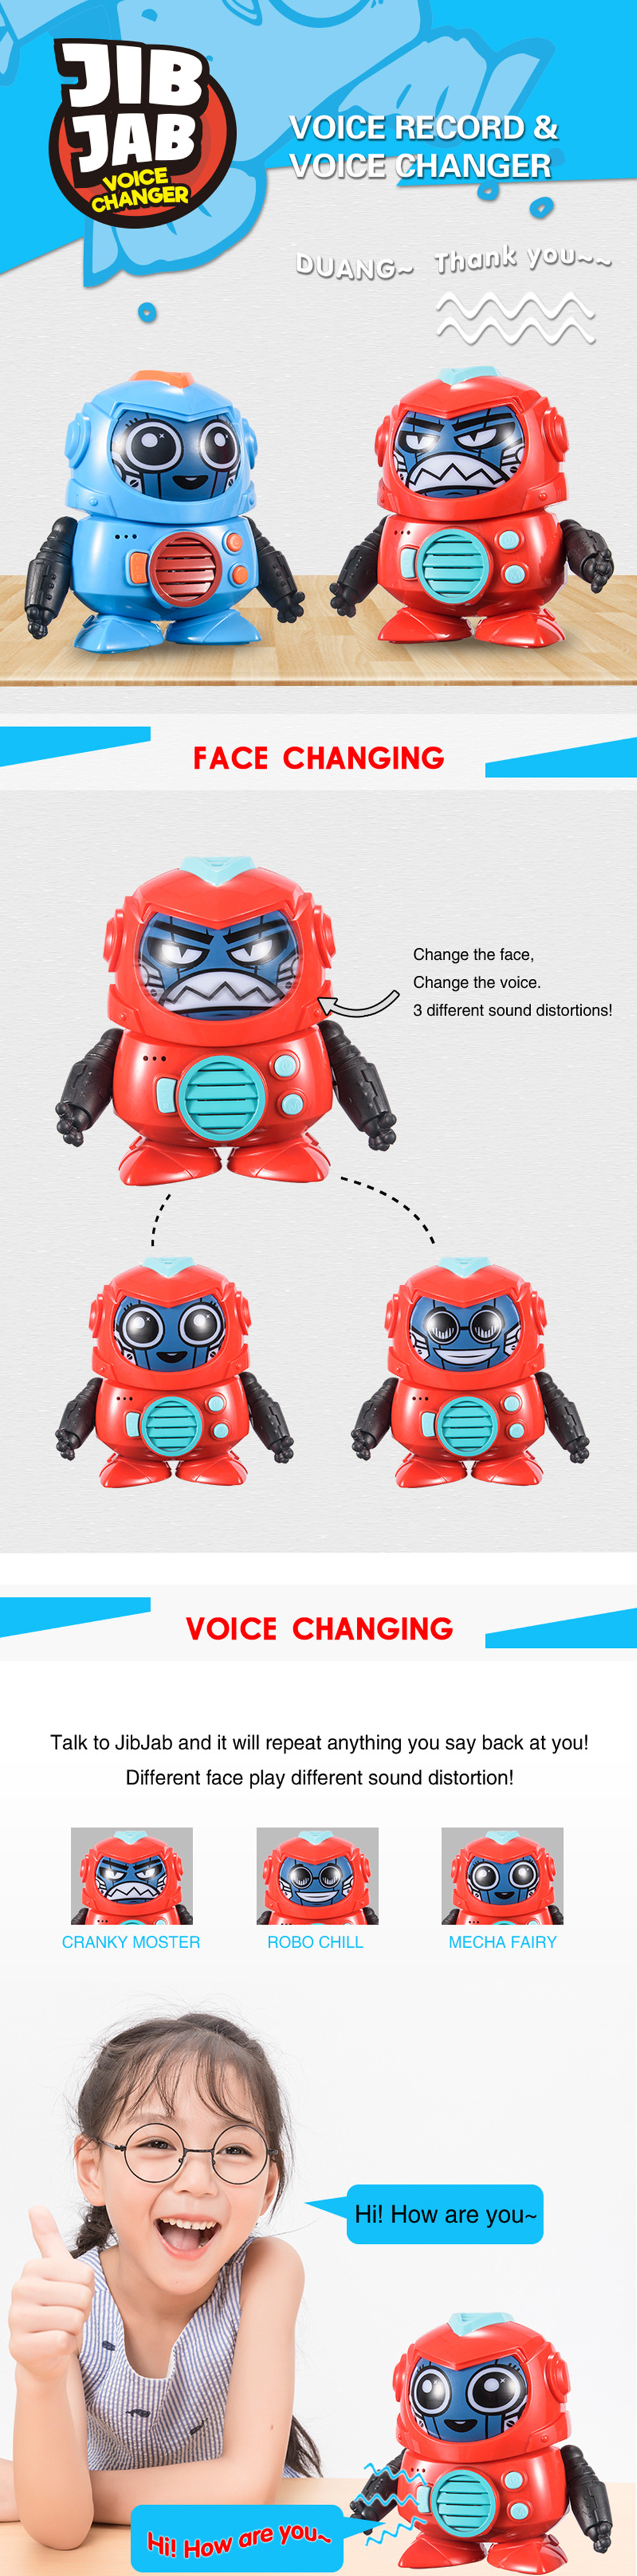 MOFUN-1902-Face-Changing-Voice-Record-Tone-Change-Interact-RC-Robot-Toy-1647981-1